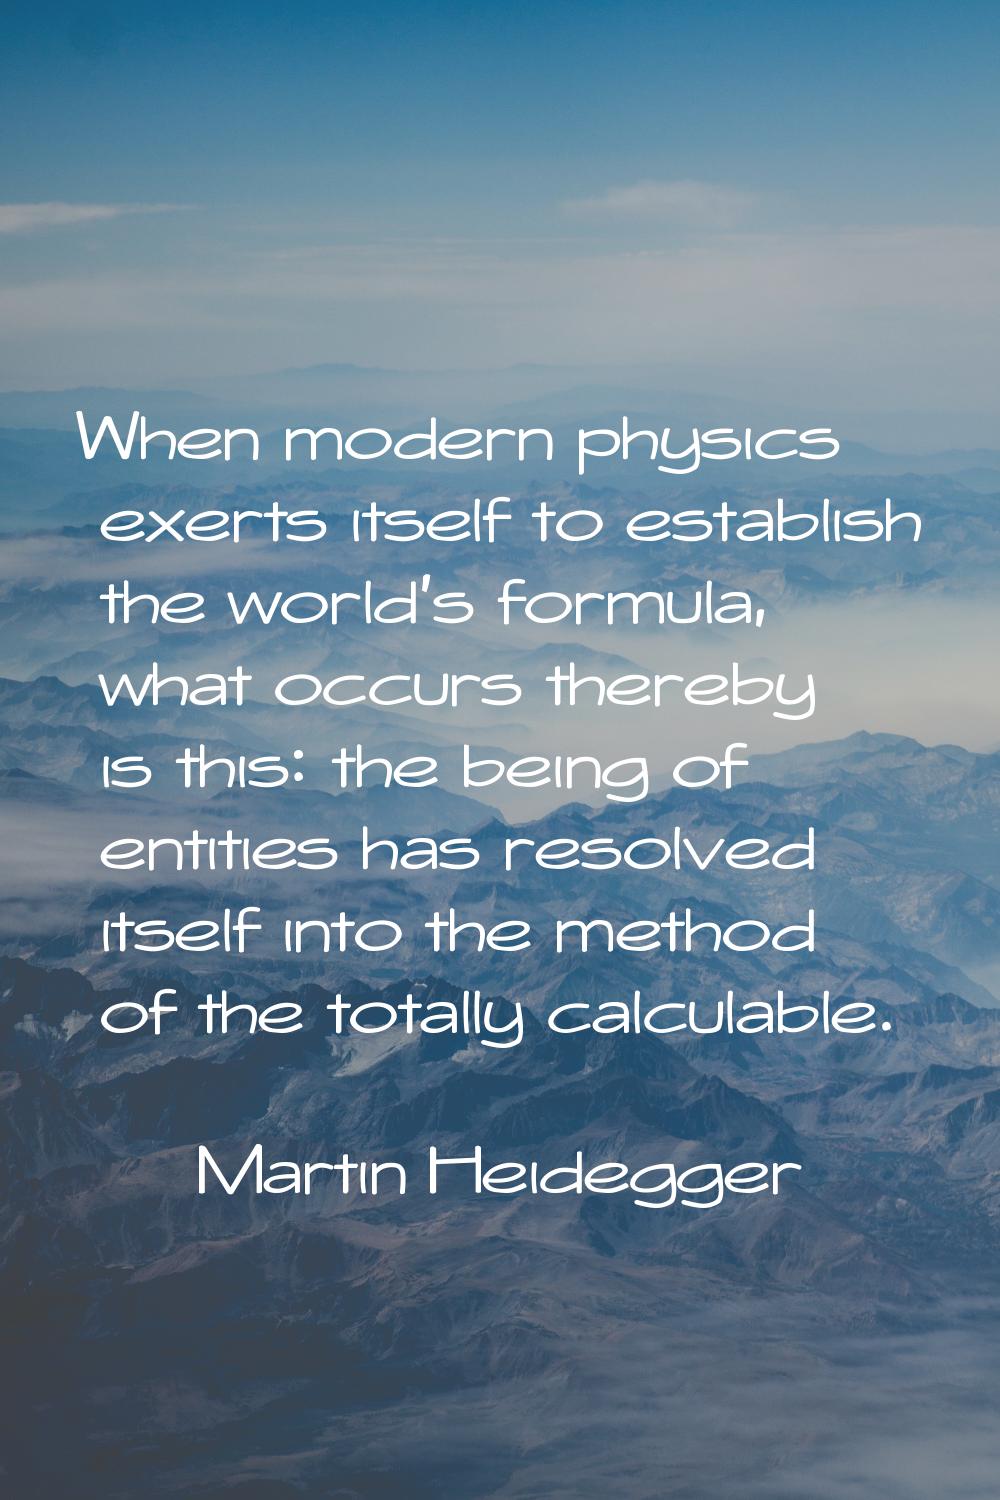 When modern physics exerts itself to establish the world's formula, what occurs thereby is this: th